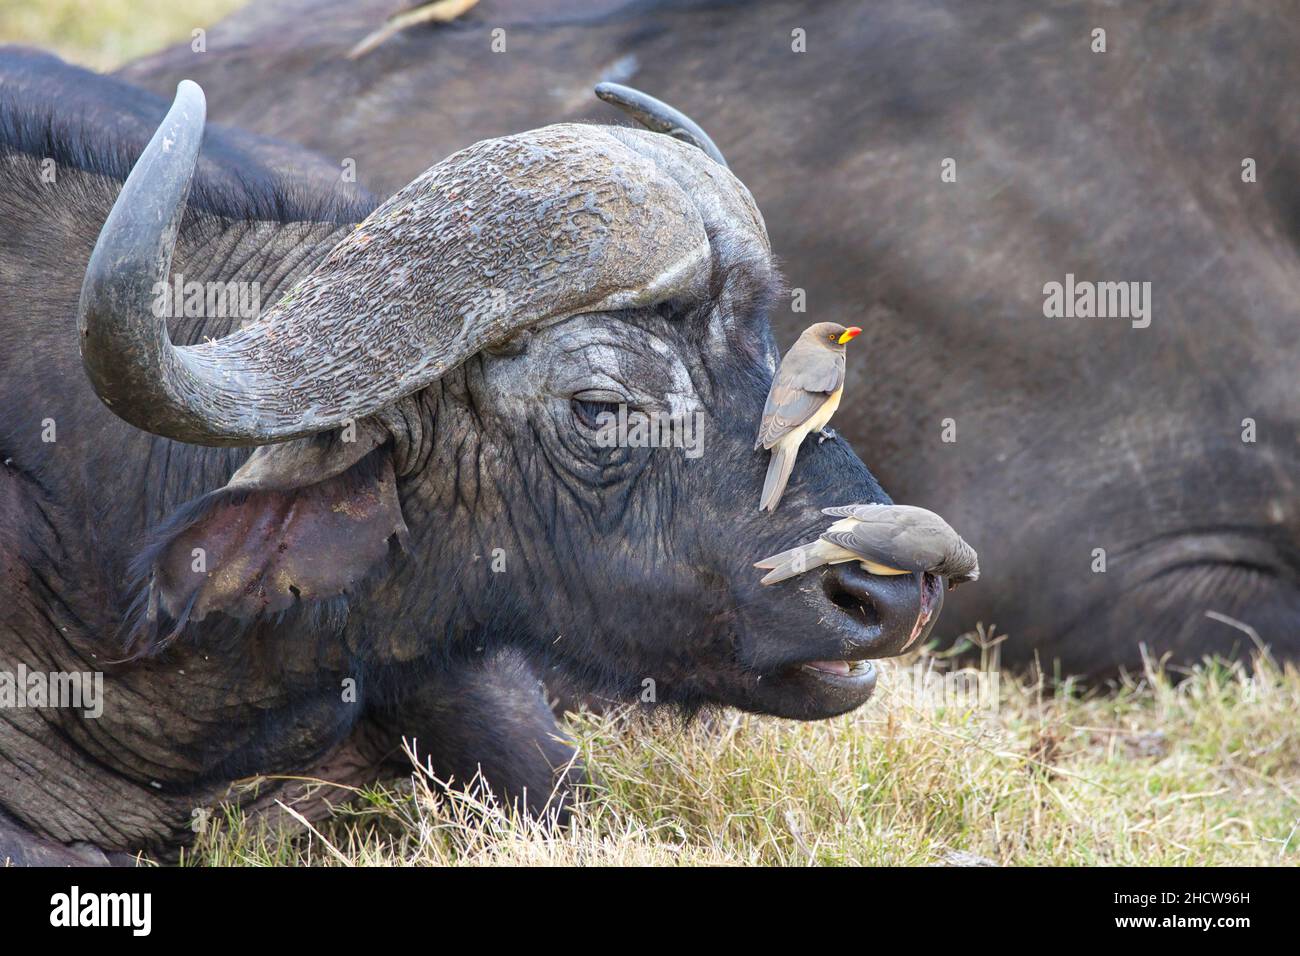 Two yellow-billed oxpecker, Buphagus africanus, sitting on the nose of an African buffalo, Syncerus caffer. Stock Photo